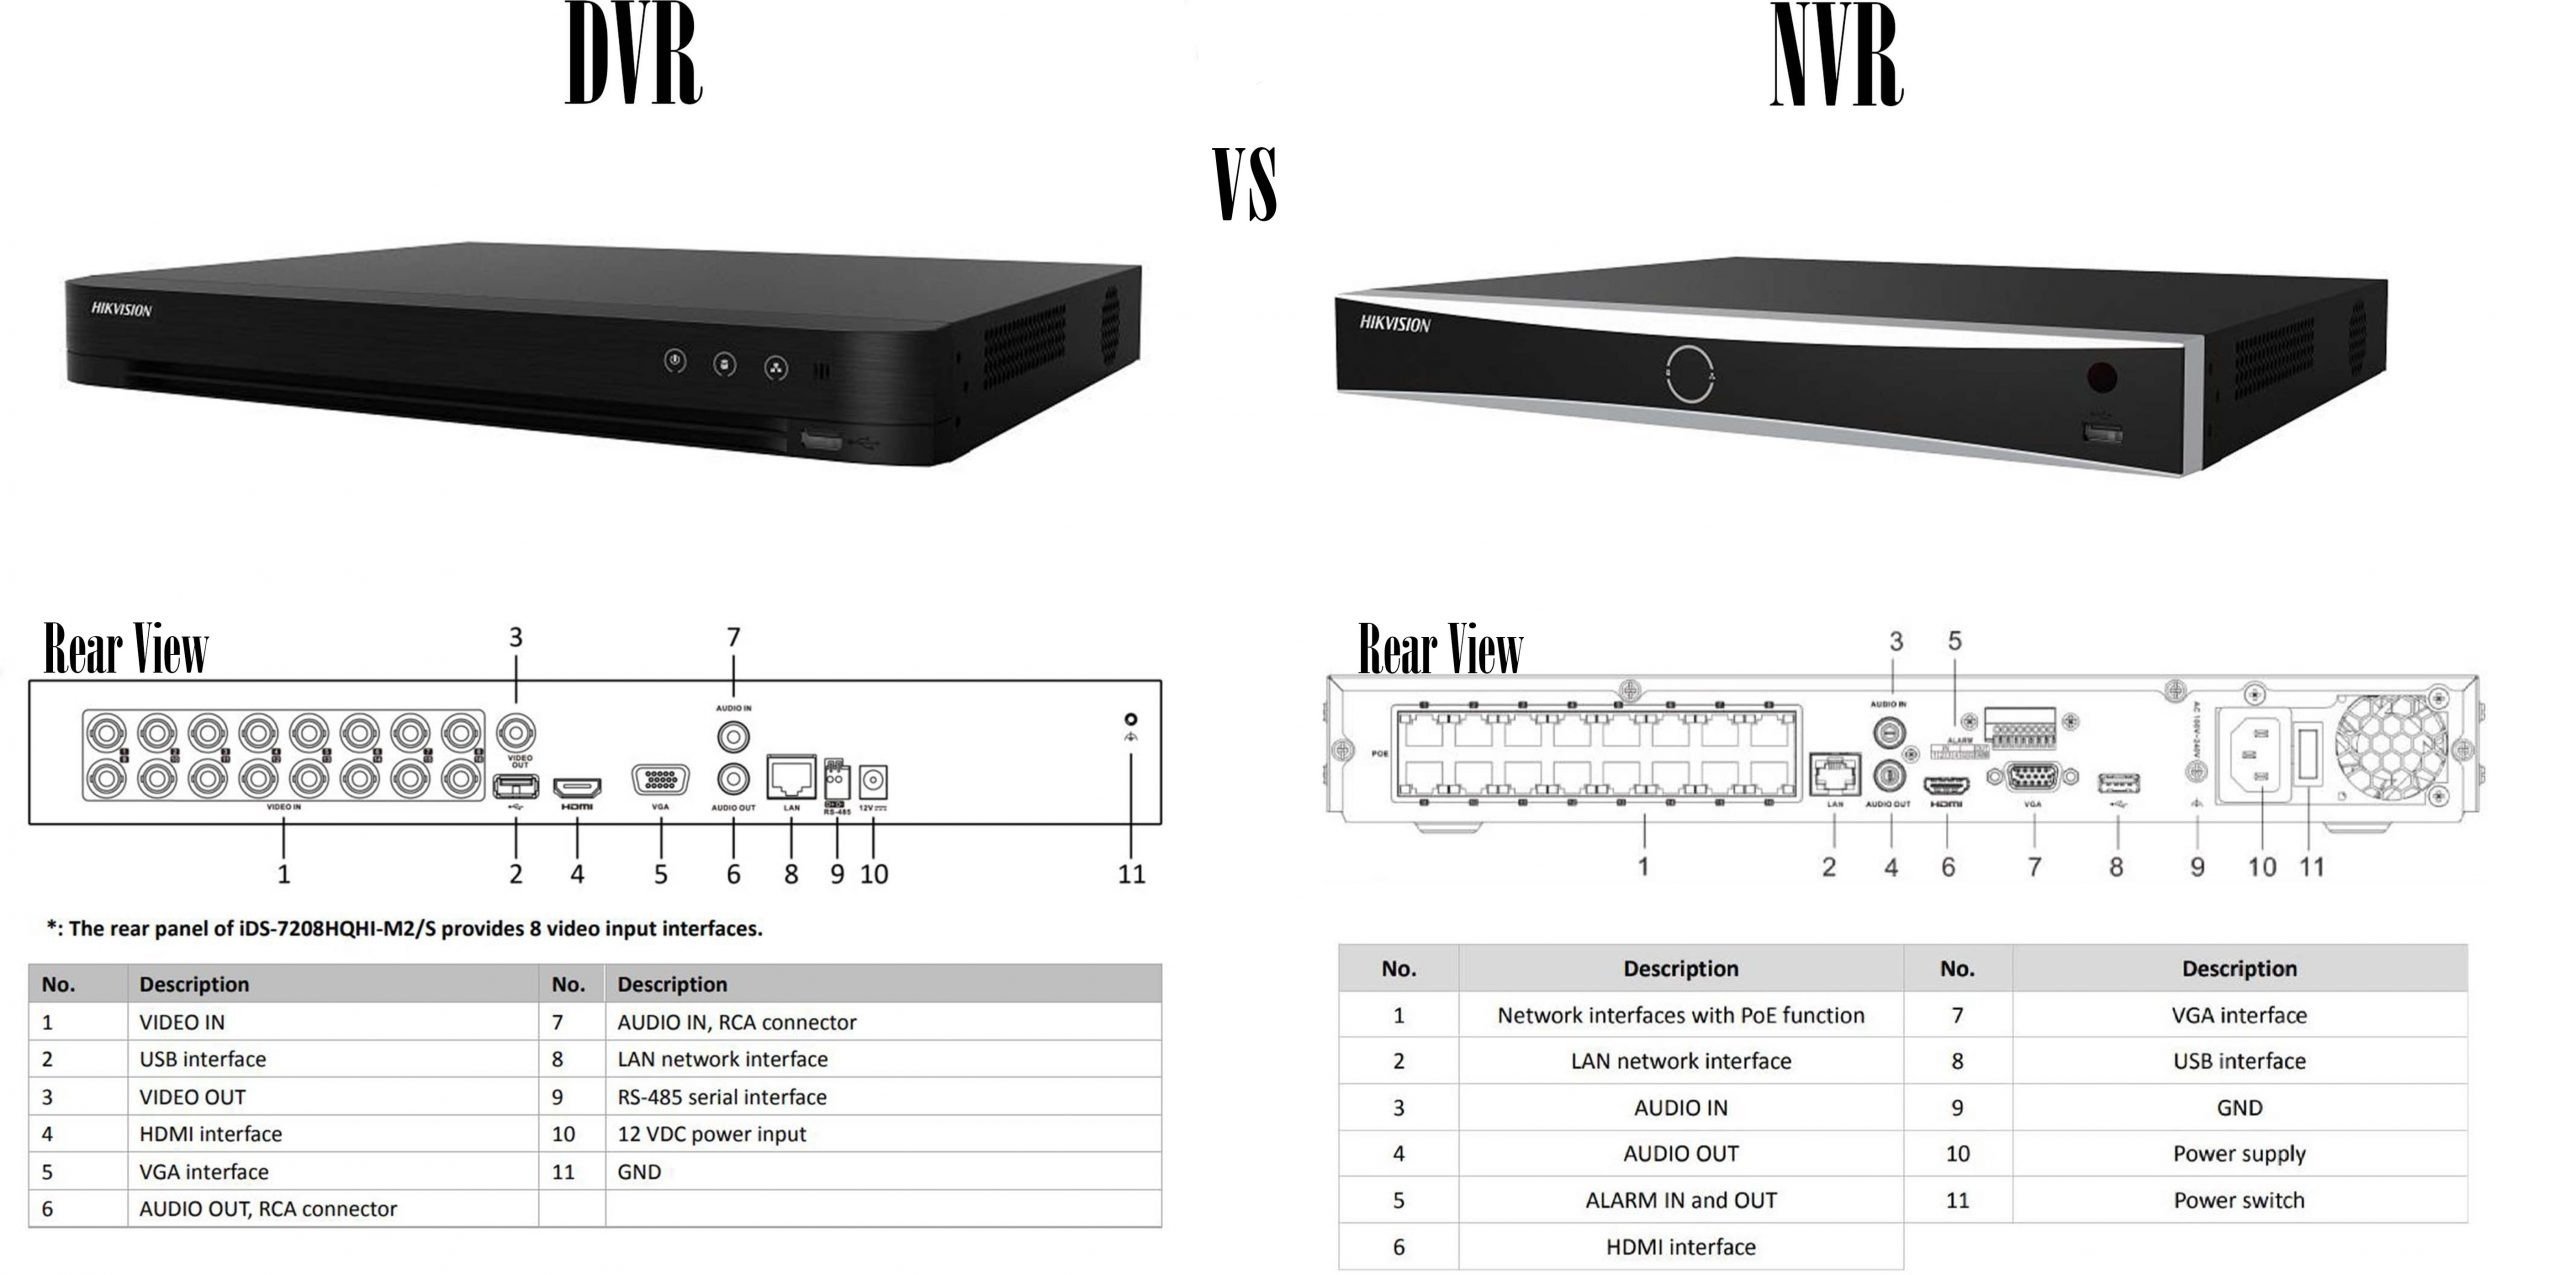 blog - Banner E scaled - Should I buy a DVR or NVR for my video security system?